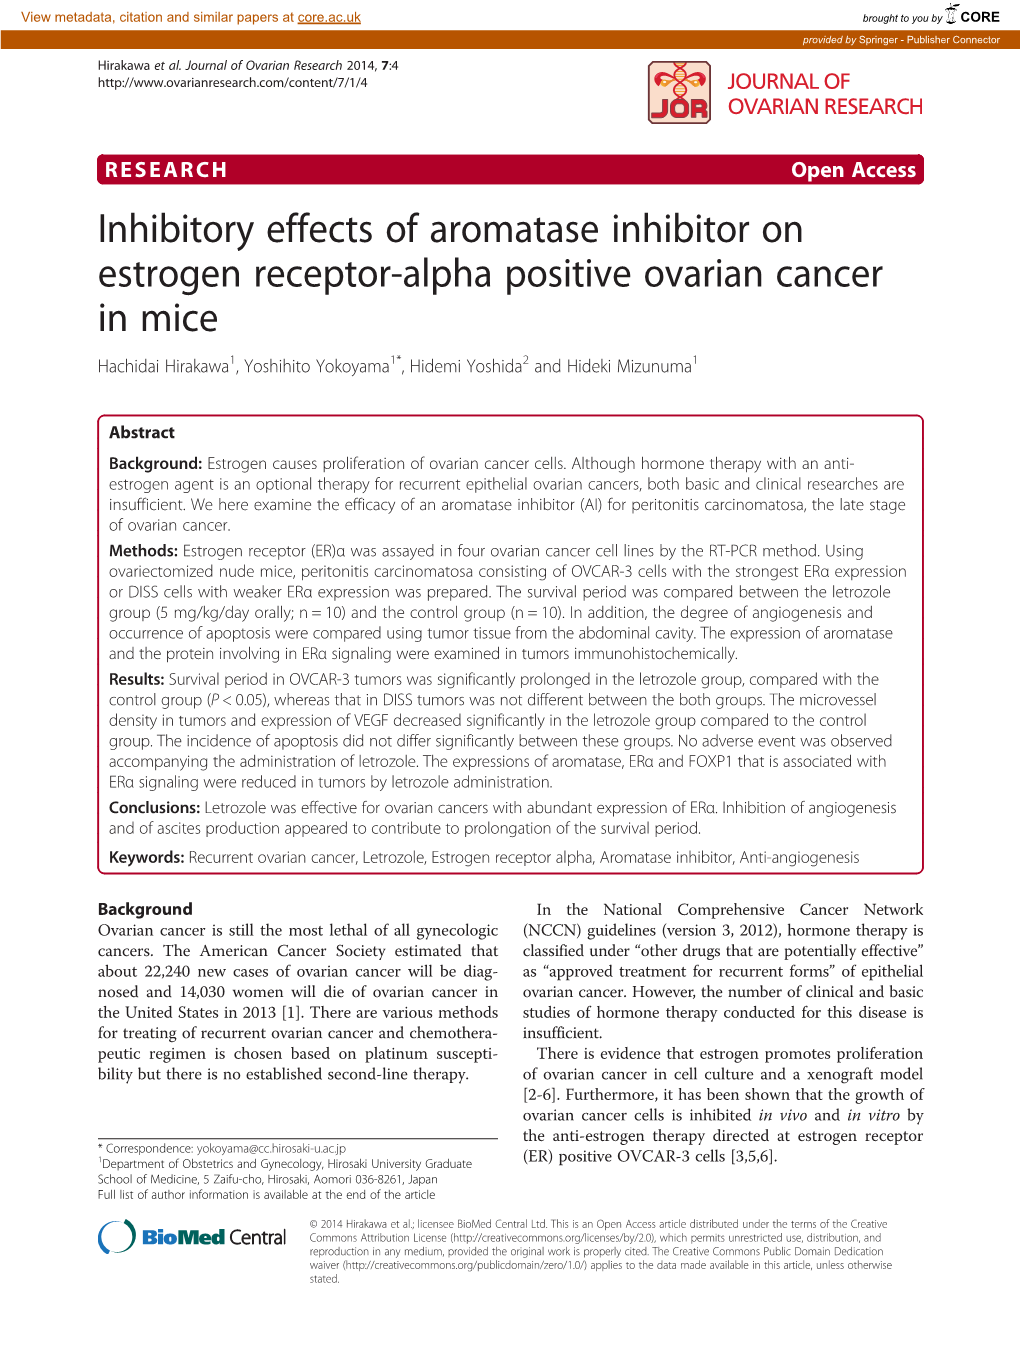 Inhibitory Effects of Aromatase Inhibitor on Estrogen Receptor-Alpha Positive Ovarian Cancer in Mice